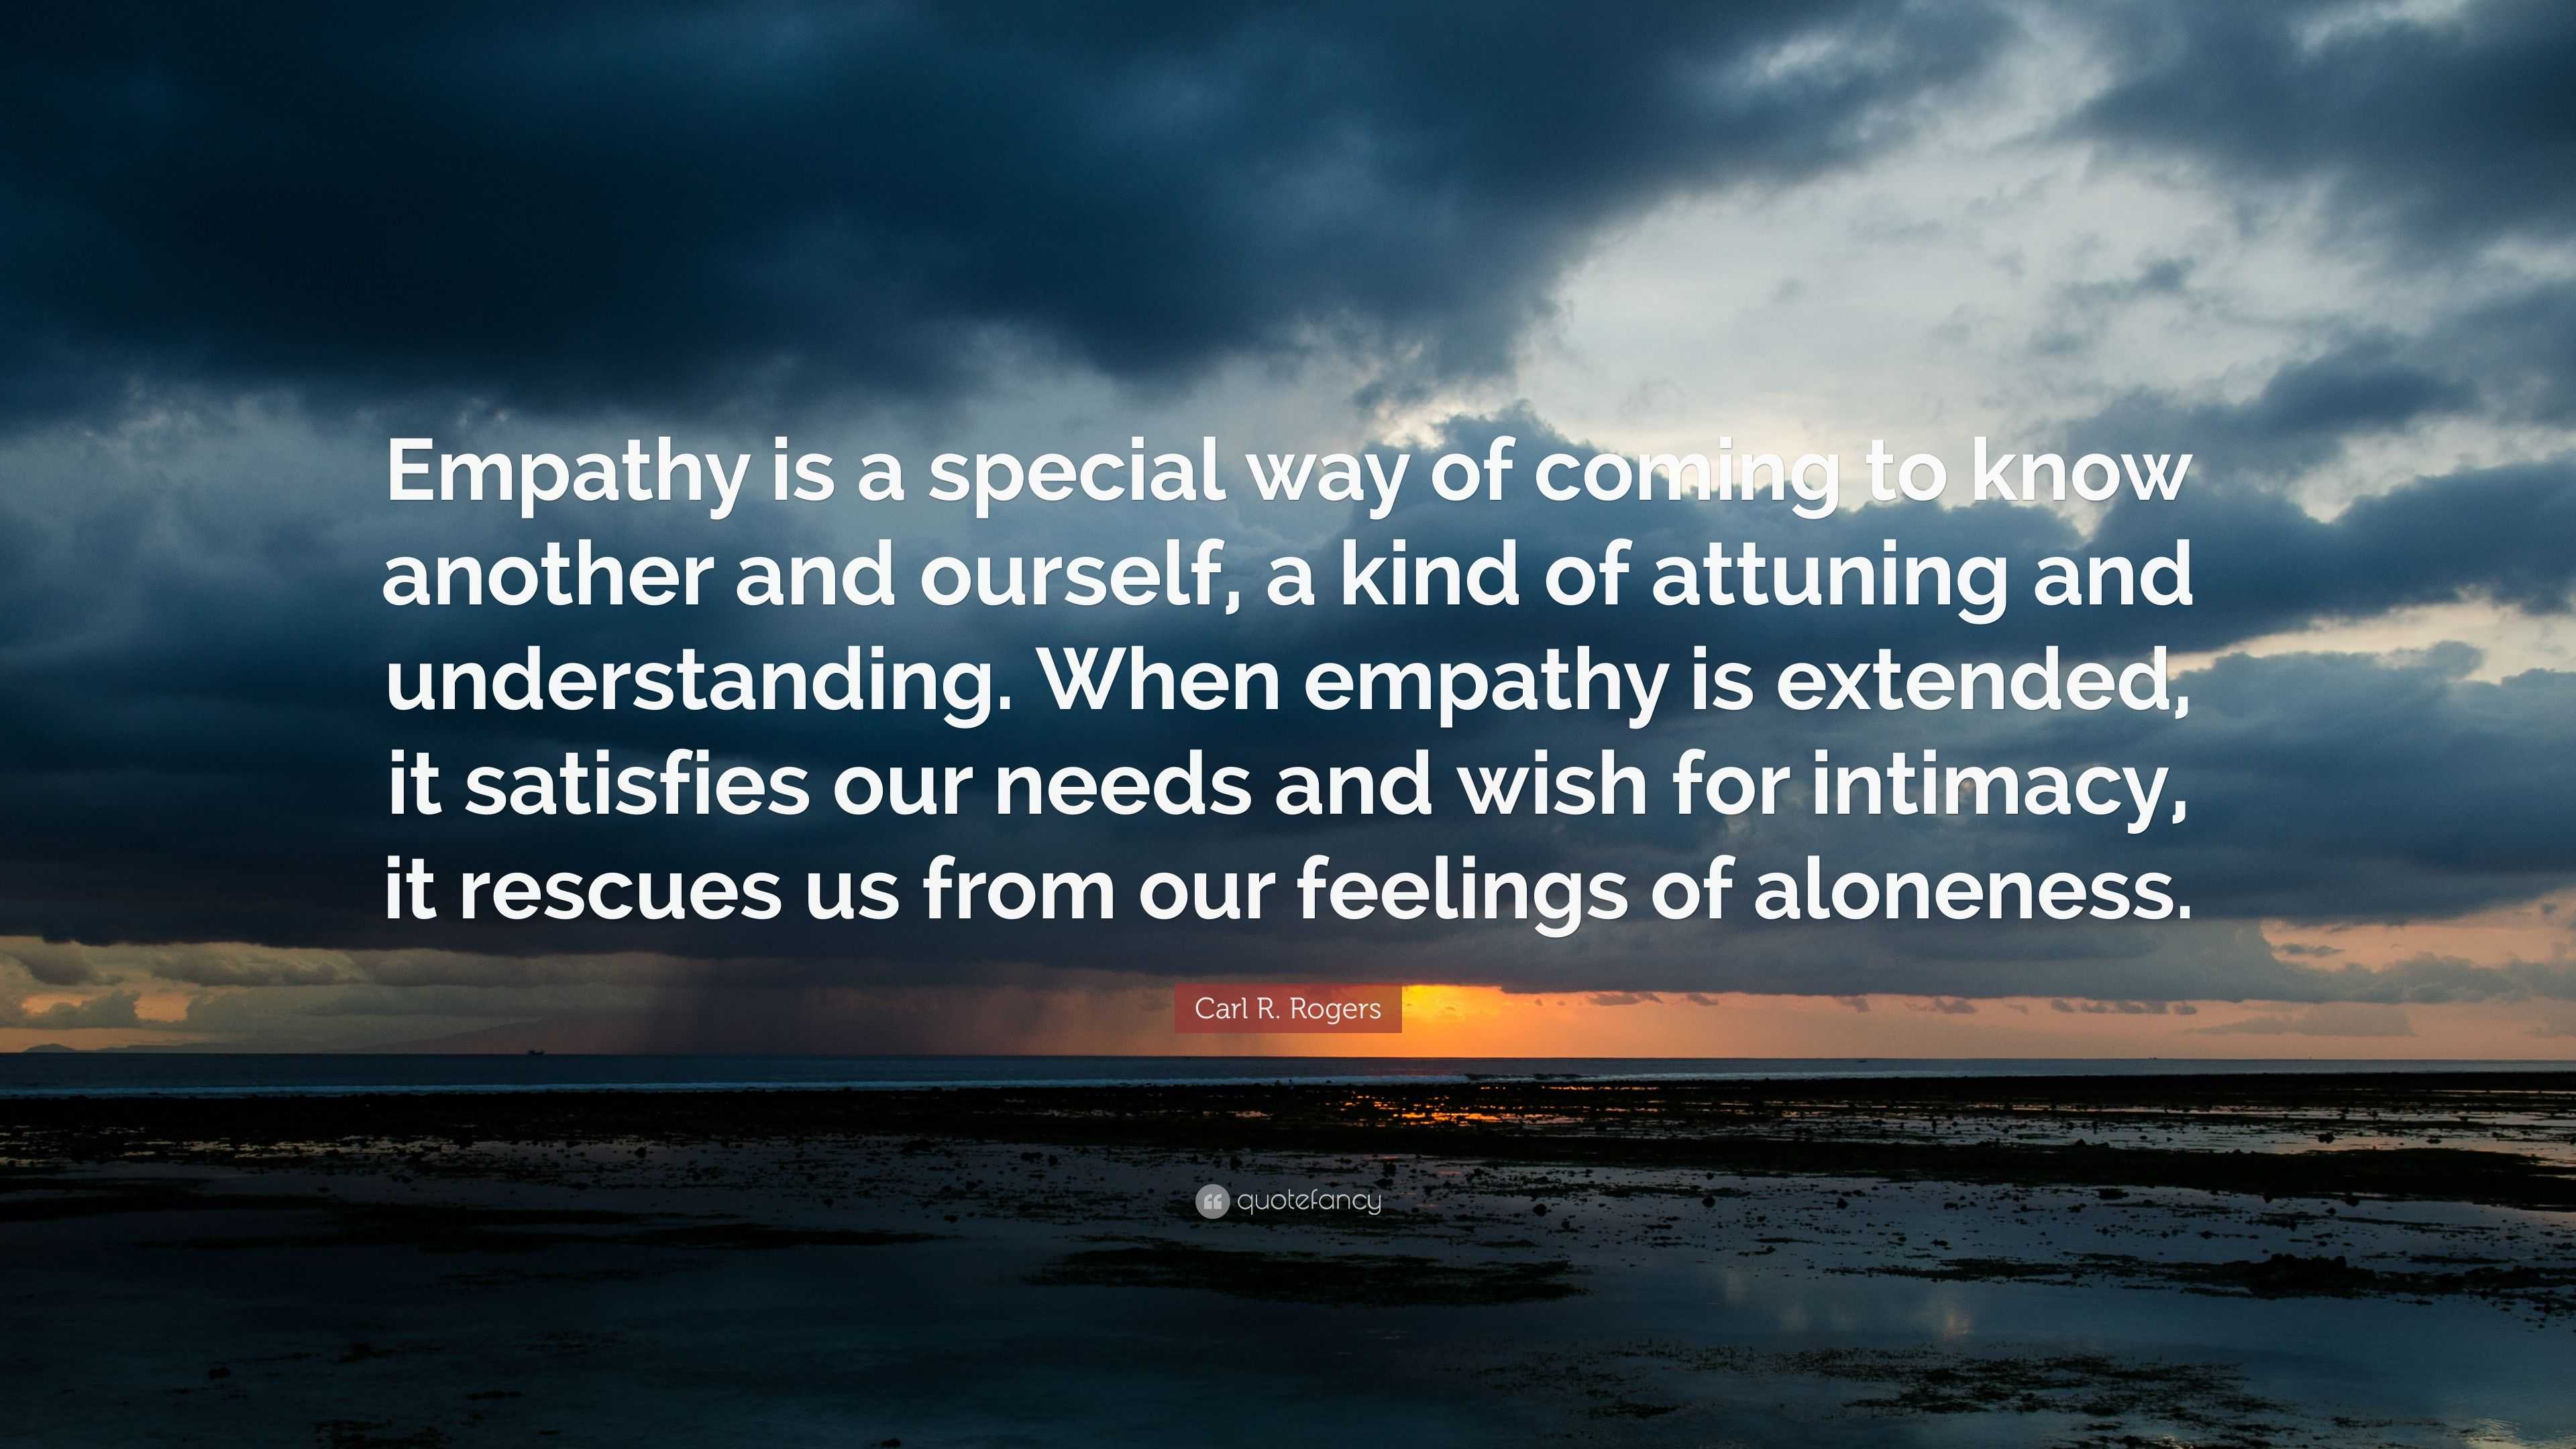 Carl R. Rogers Quote: “Empathy is a special way of coming to know